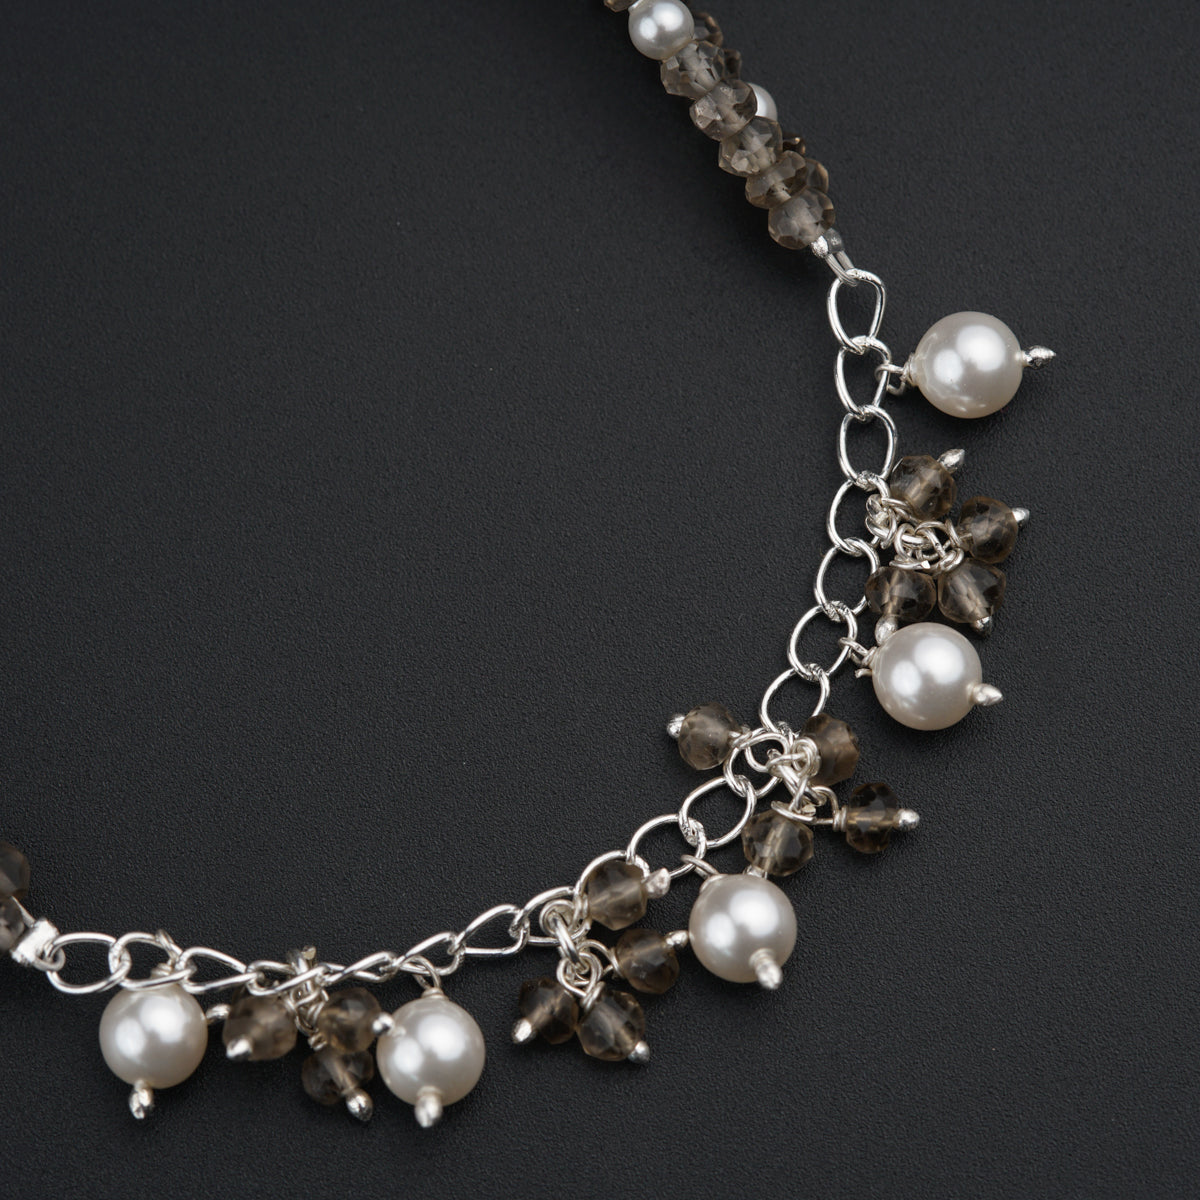 Silver Choker with Smokey Quartz and Pearls